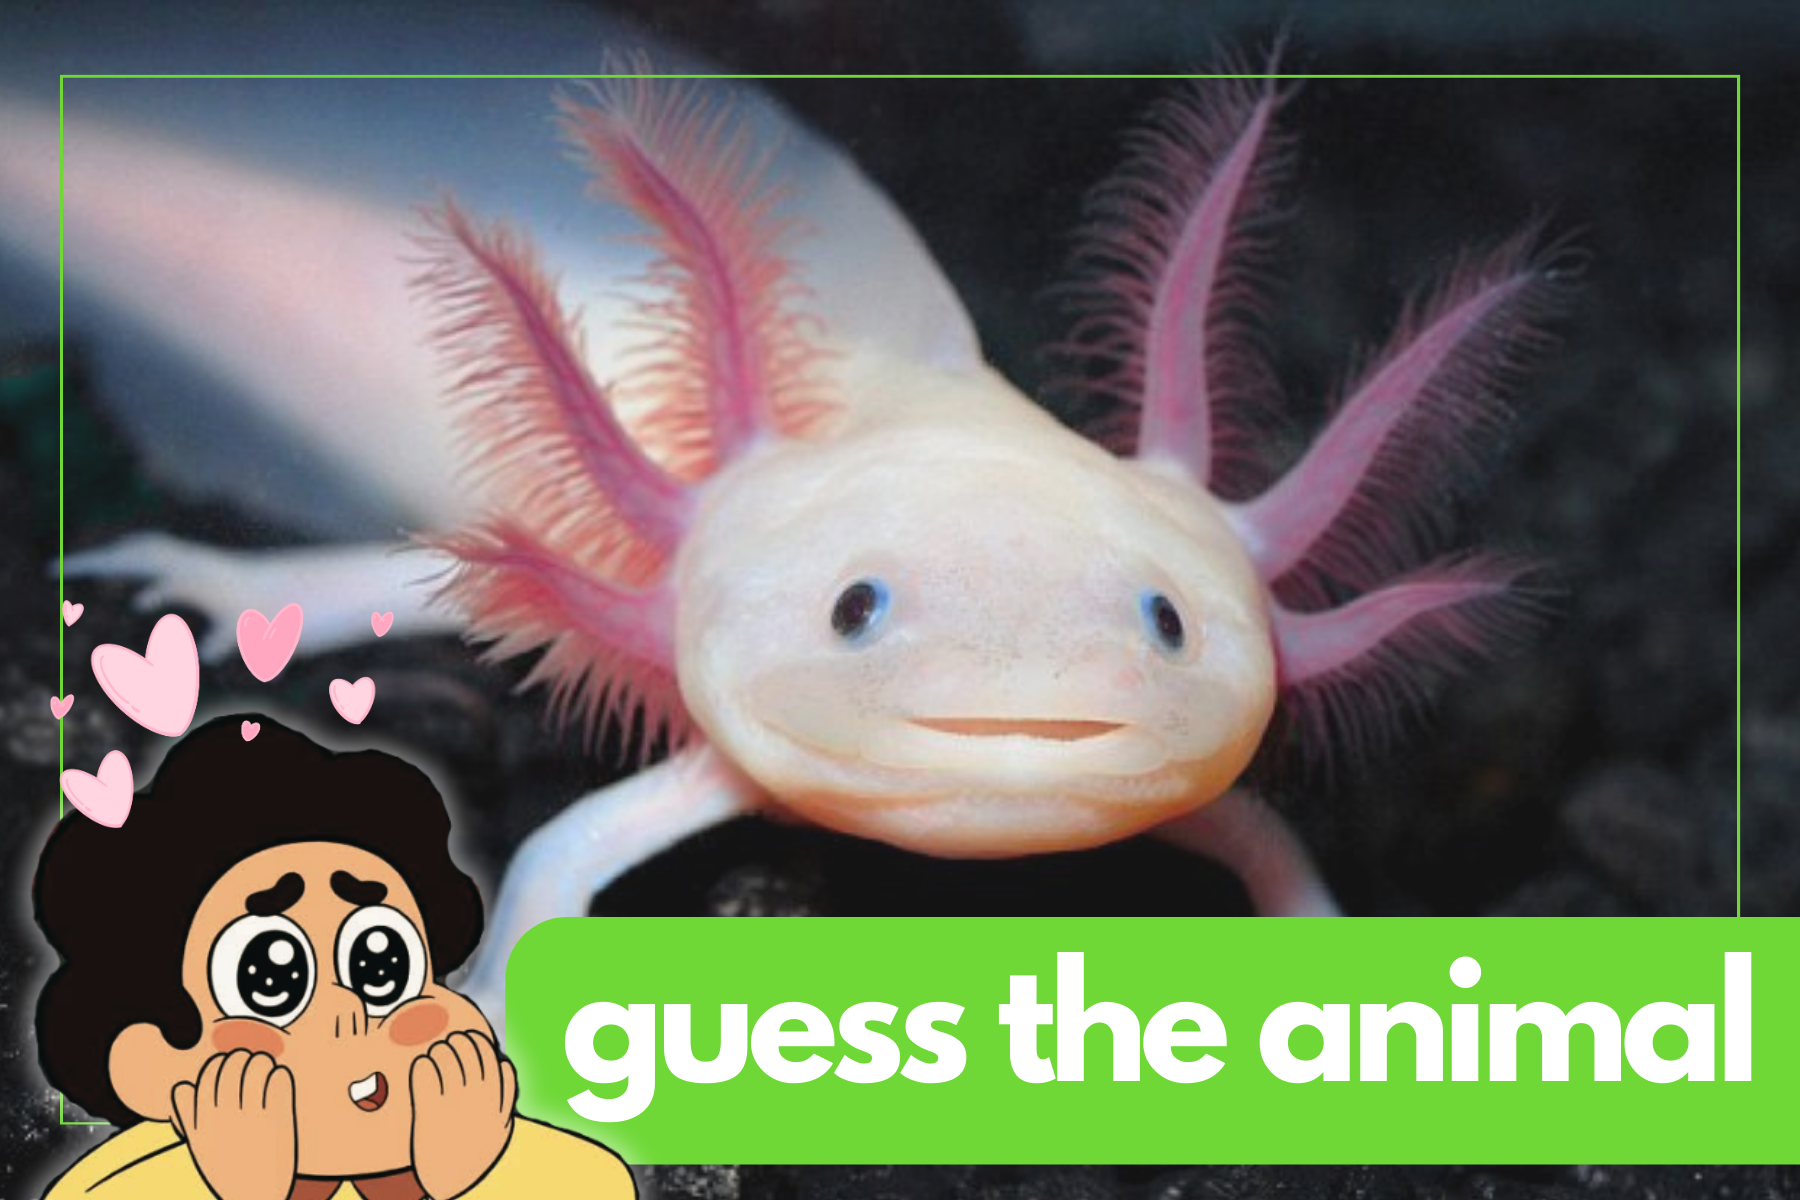 Animal Quiz: What Animal is This?